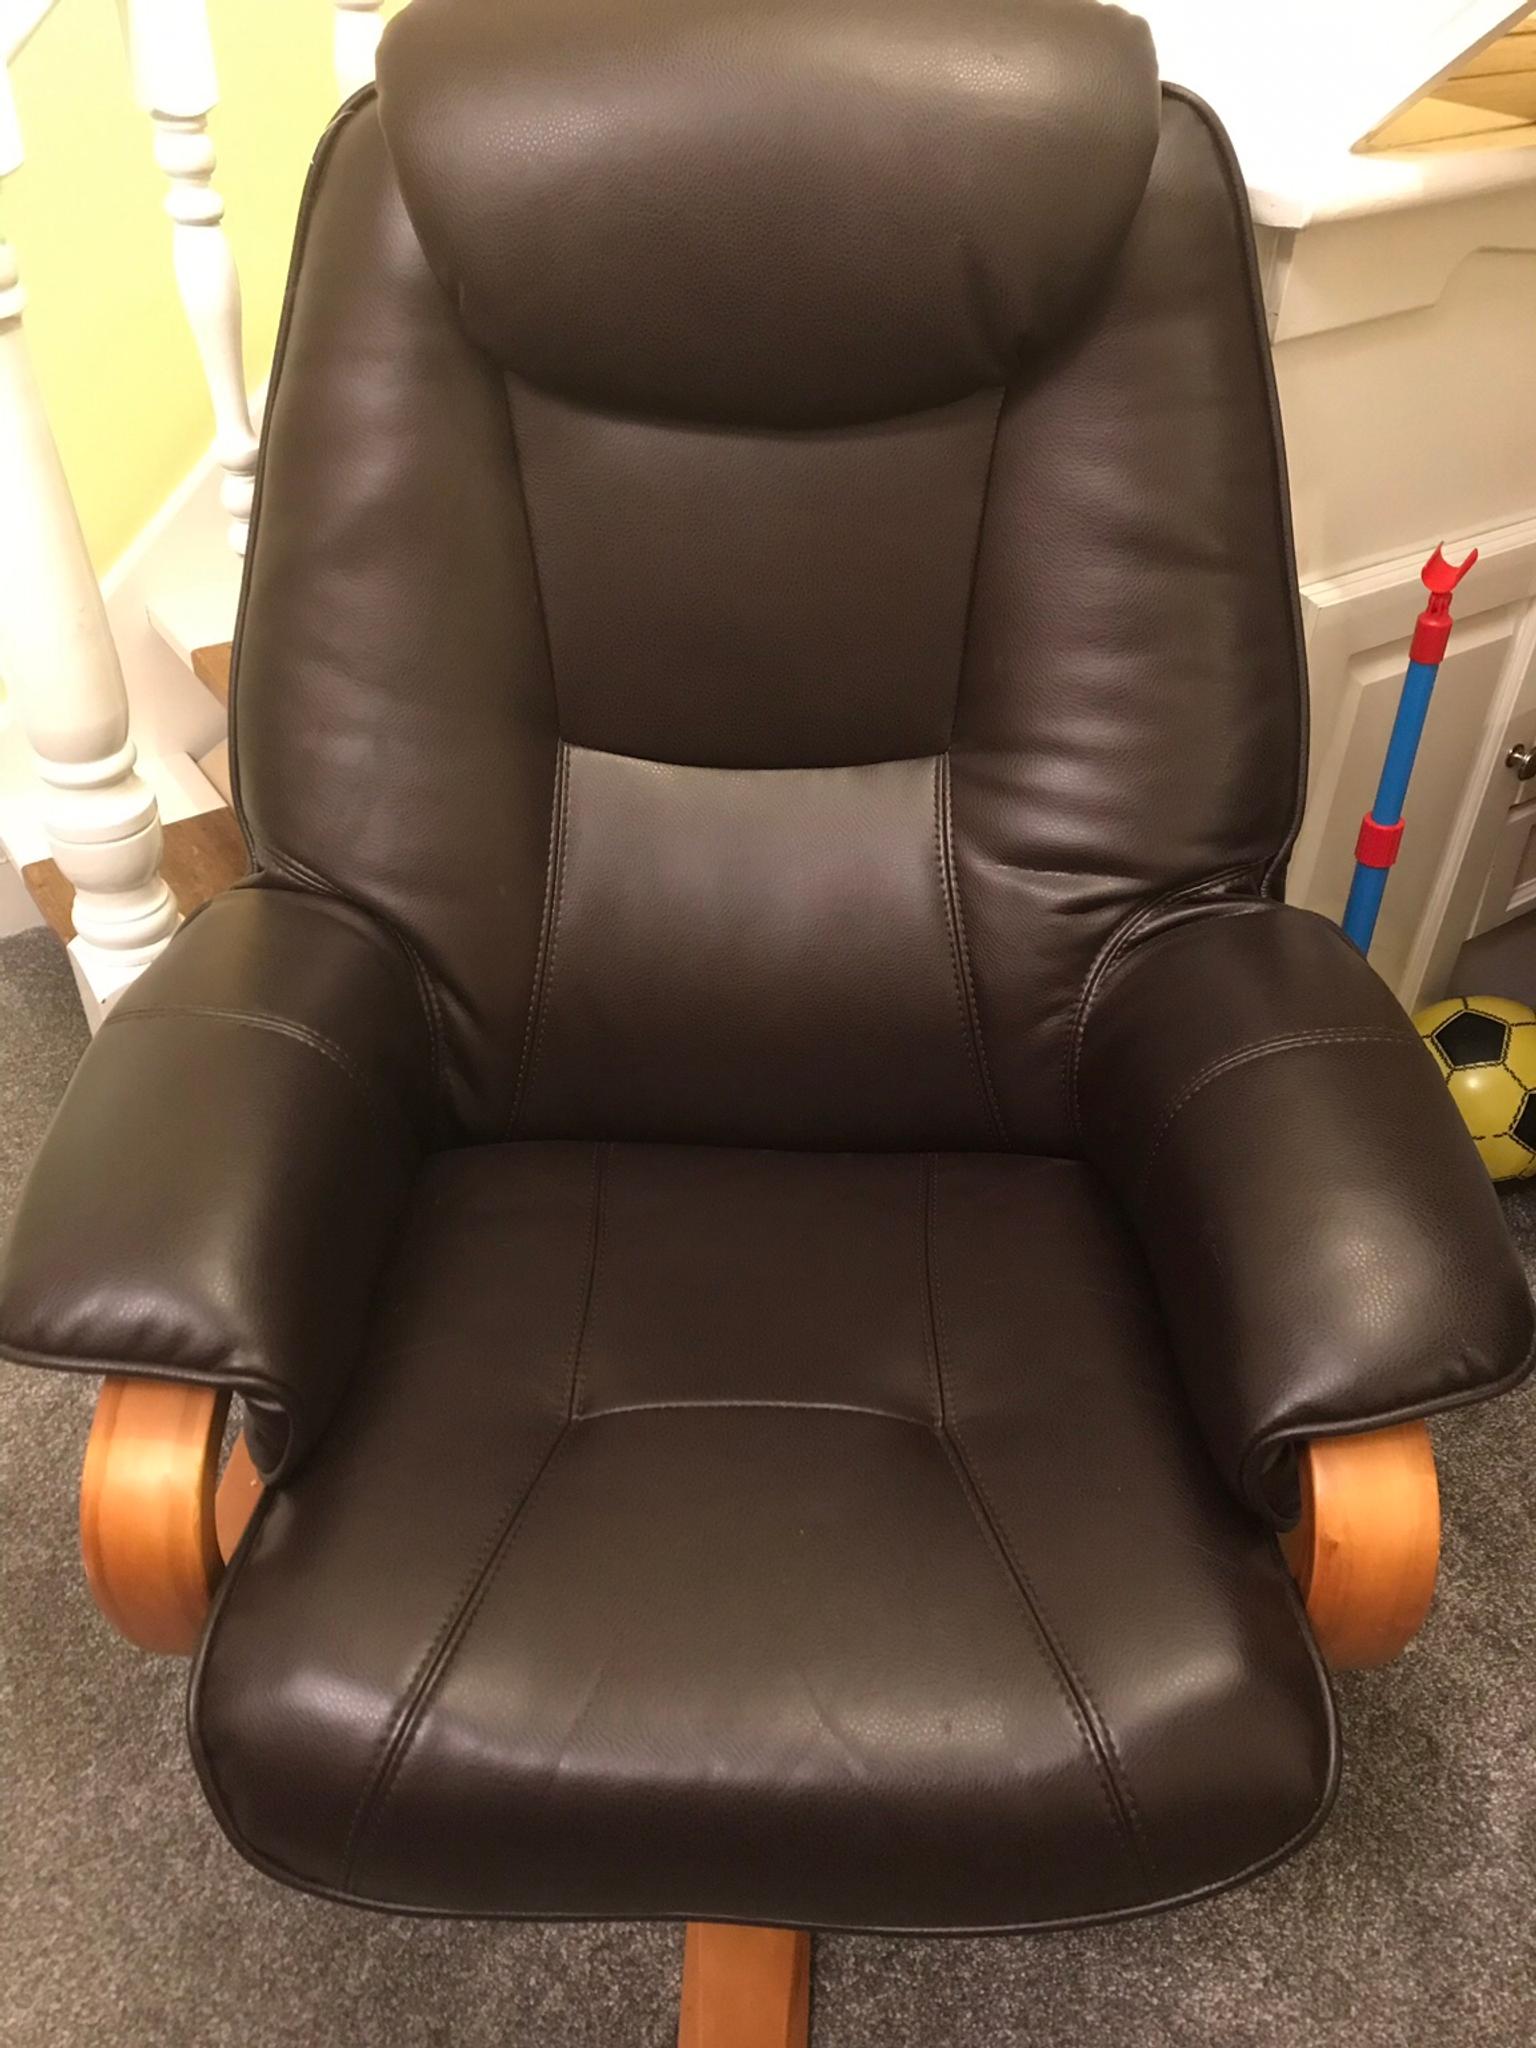 Leather Reclining Chair With Footstool In Salford For 175 00 For